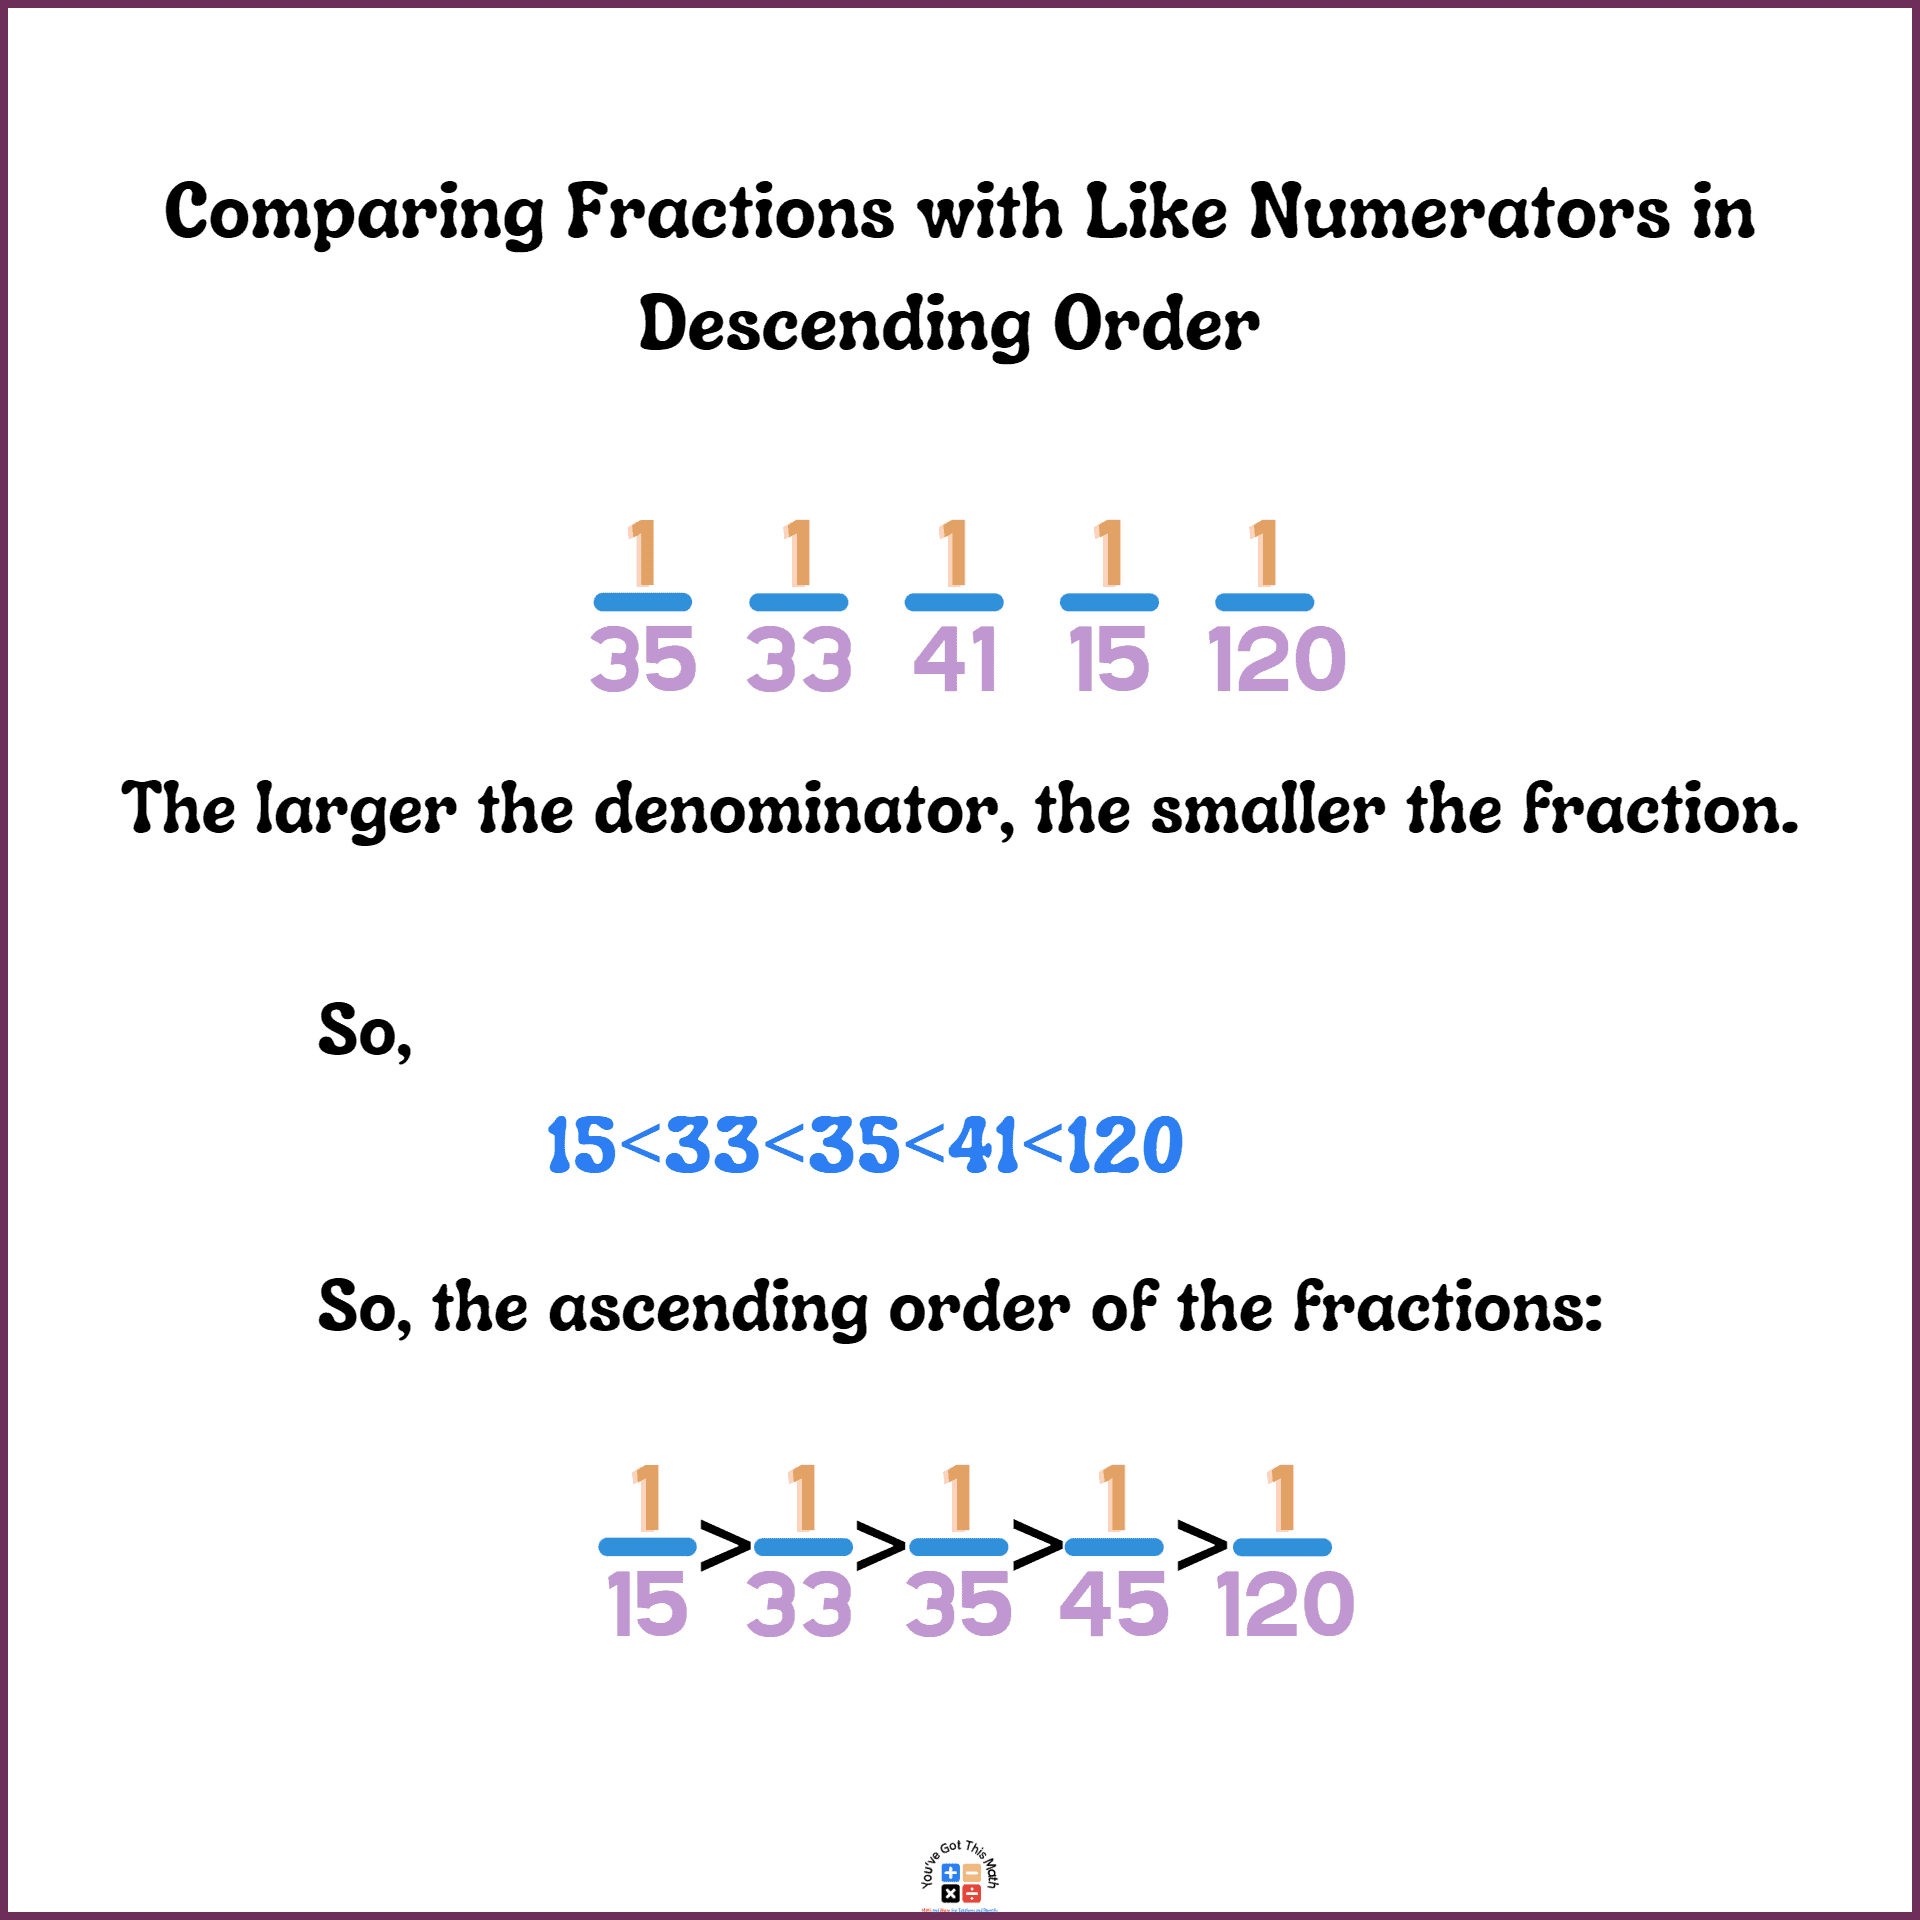 Compare fractions with the same numerators in descending order